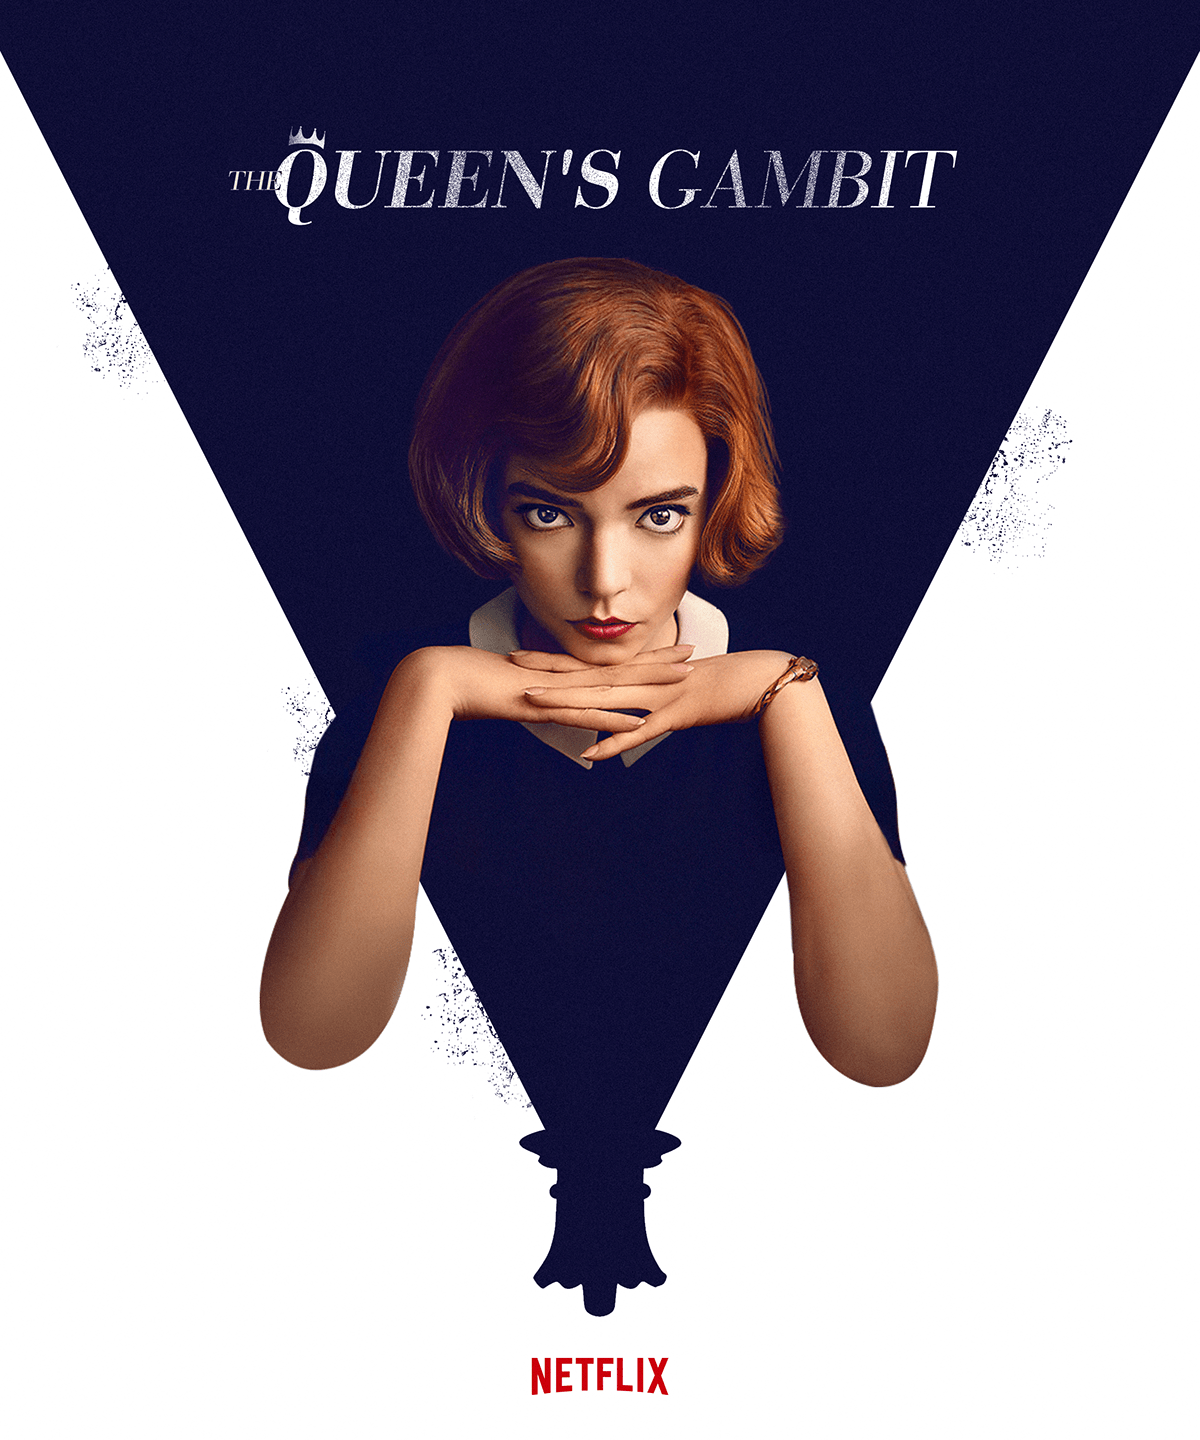 Download The Queen's Gambit wallpapers for mobile phone, free